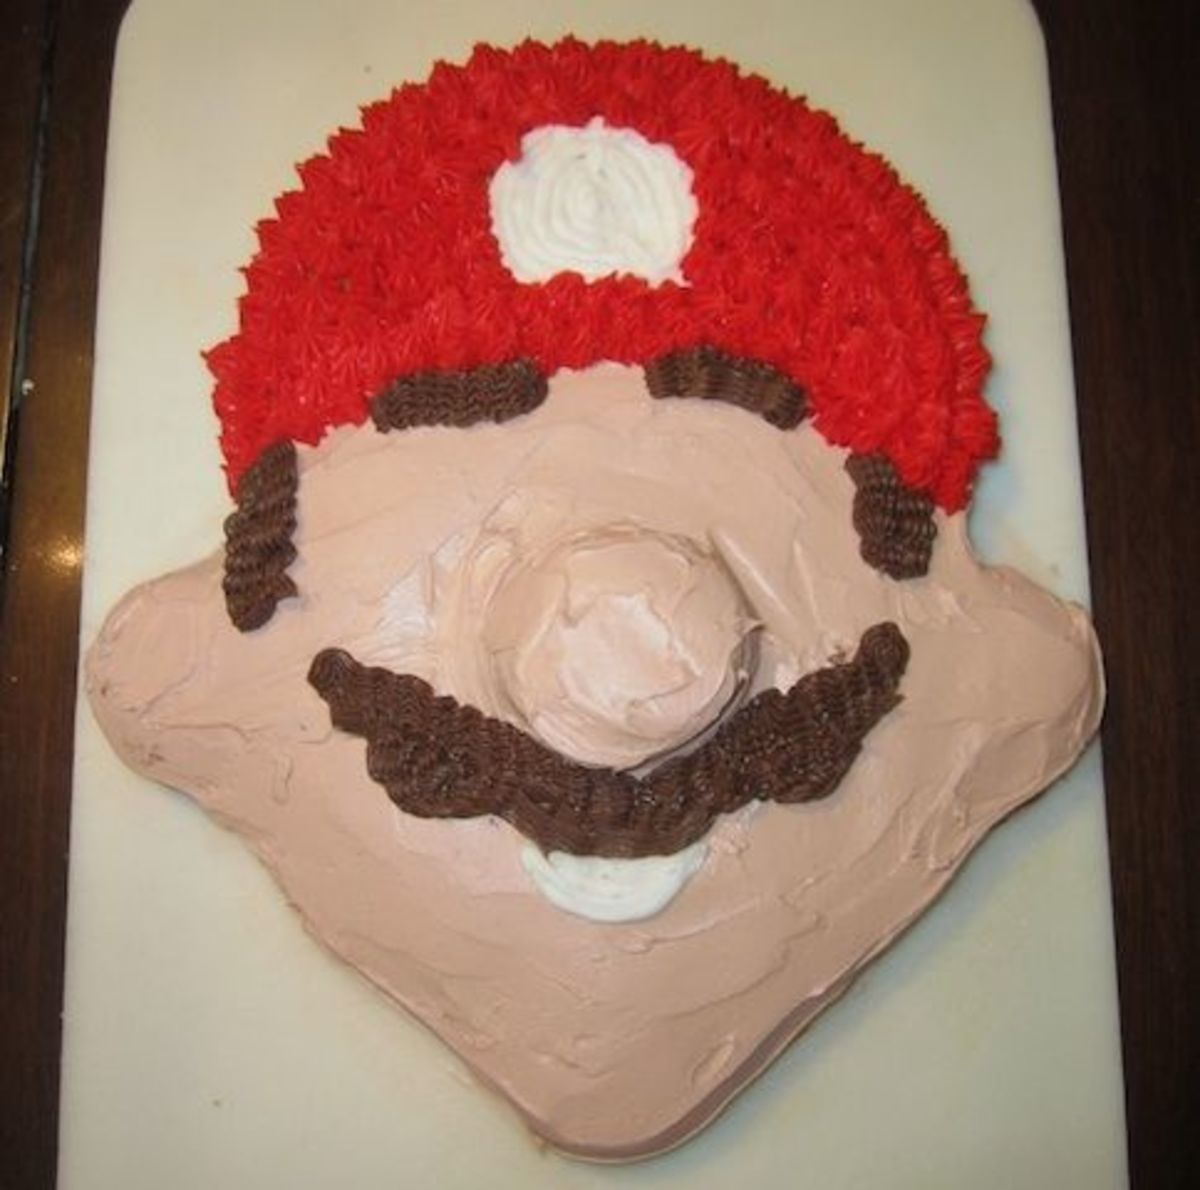 I used chocolate icing for Mario's eyebrows, sideburns, and infamous mustache.